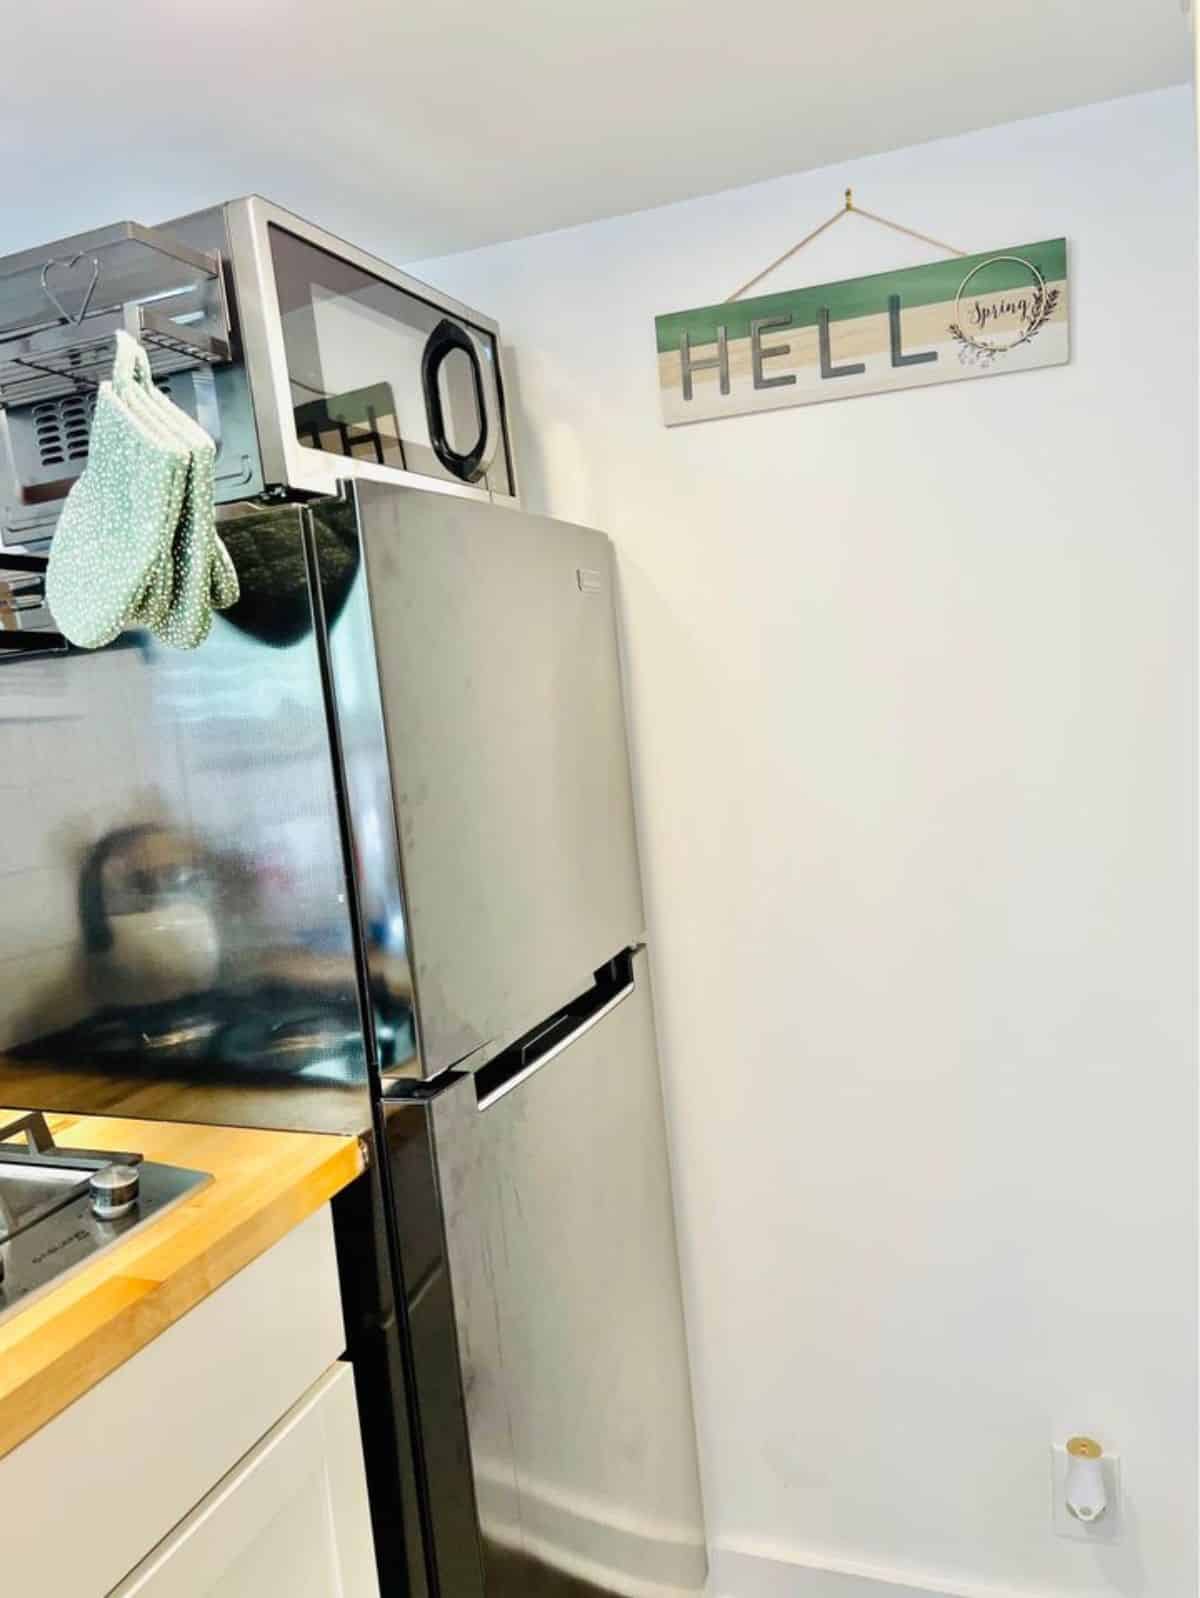 refrigerator included in the kitchen area of remodeled home on wheels